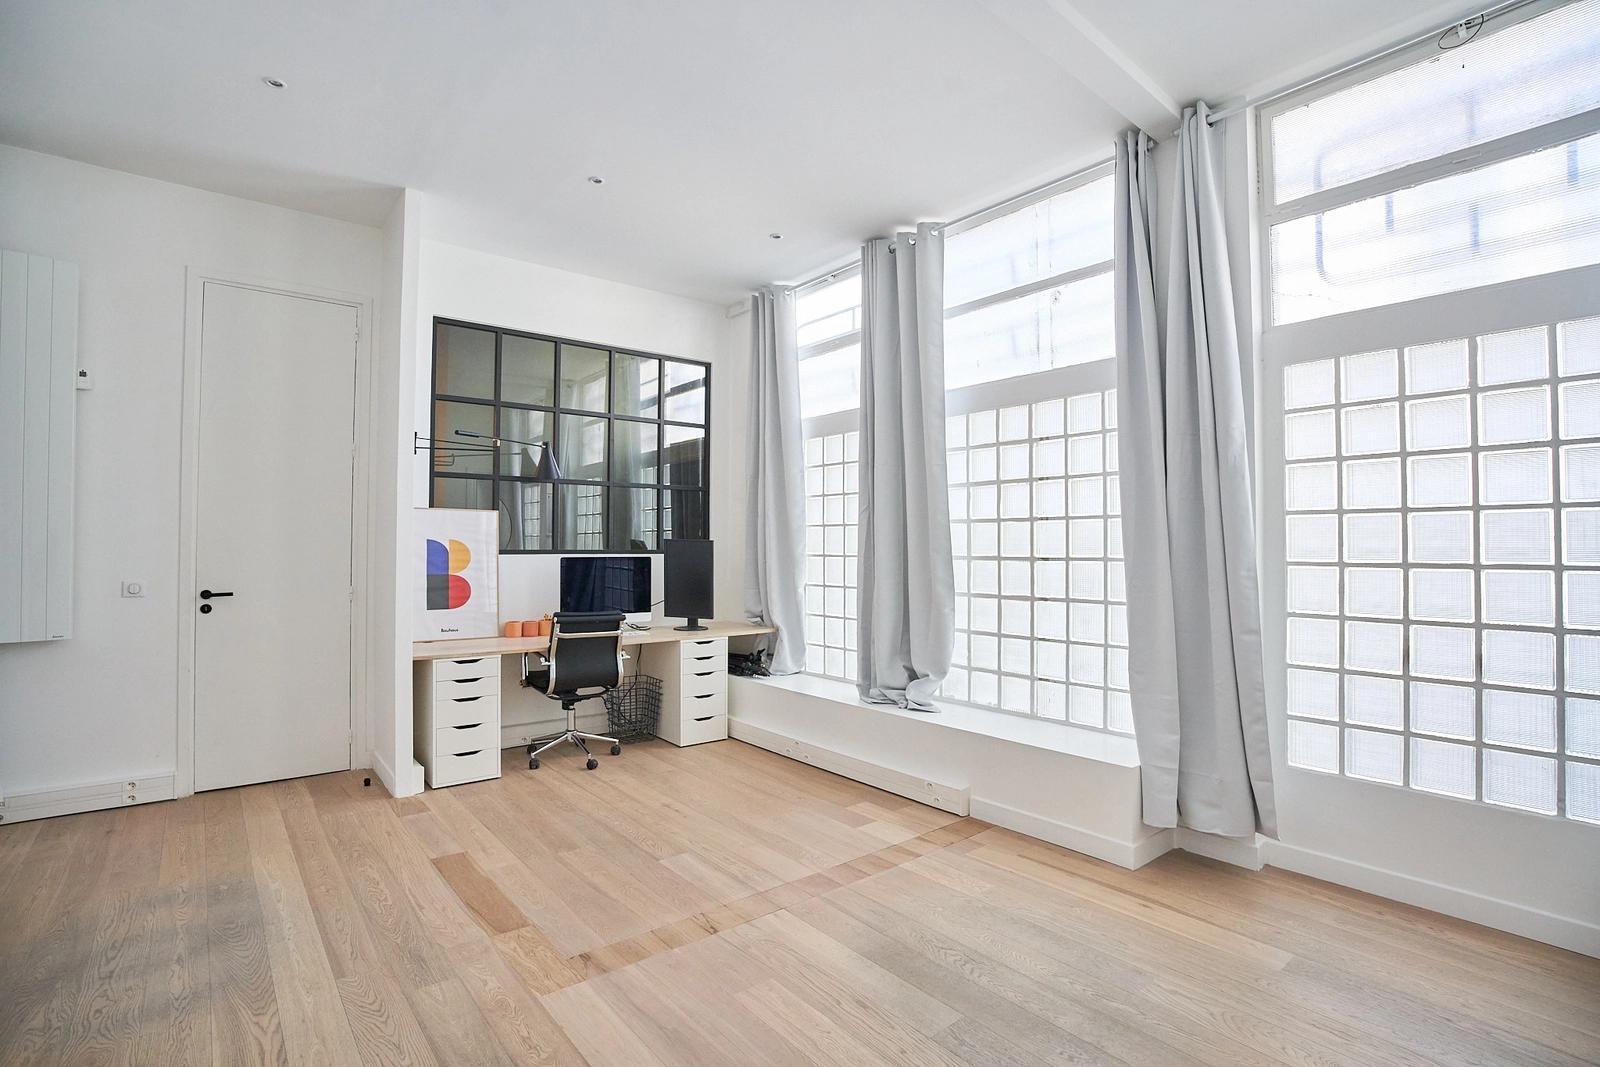 Living room in Bright photo studio just a stone's throw from Les Batignolles - 1